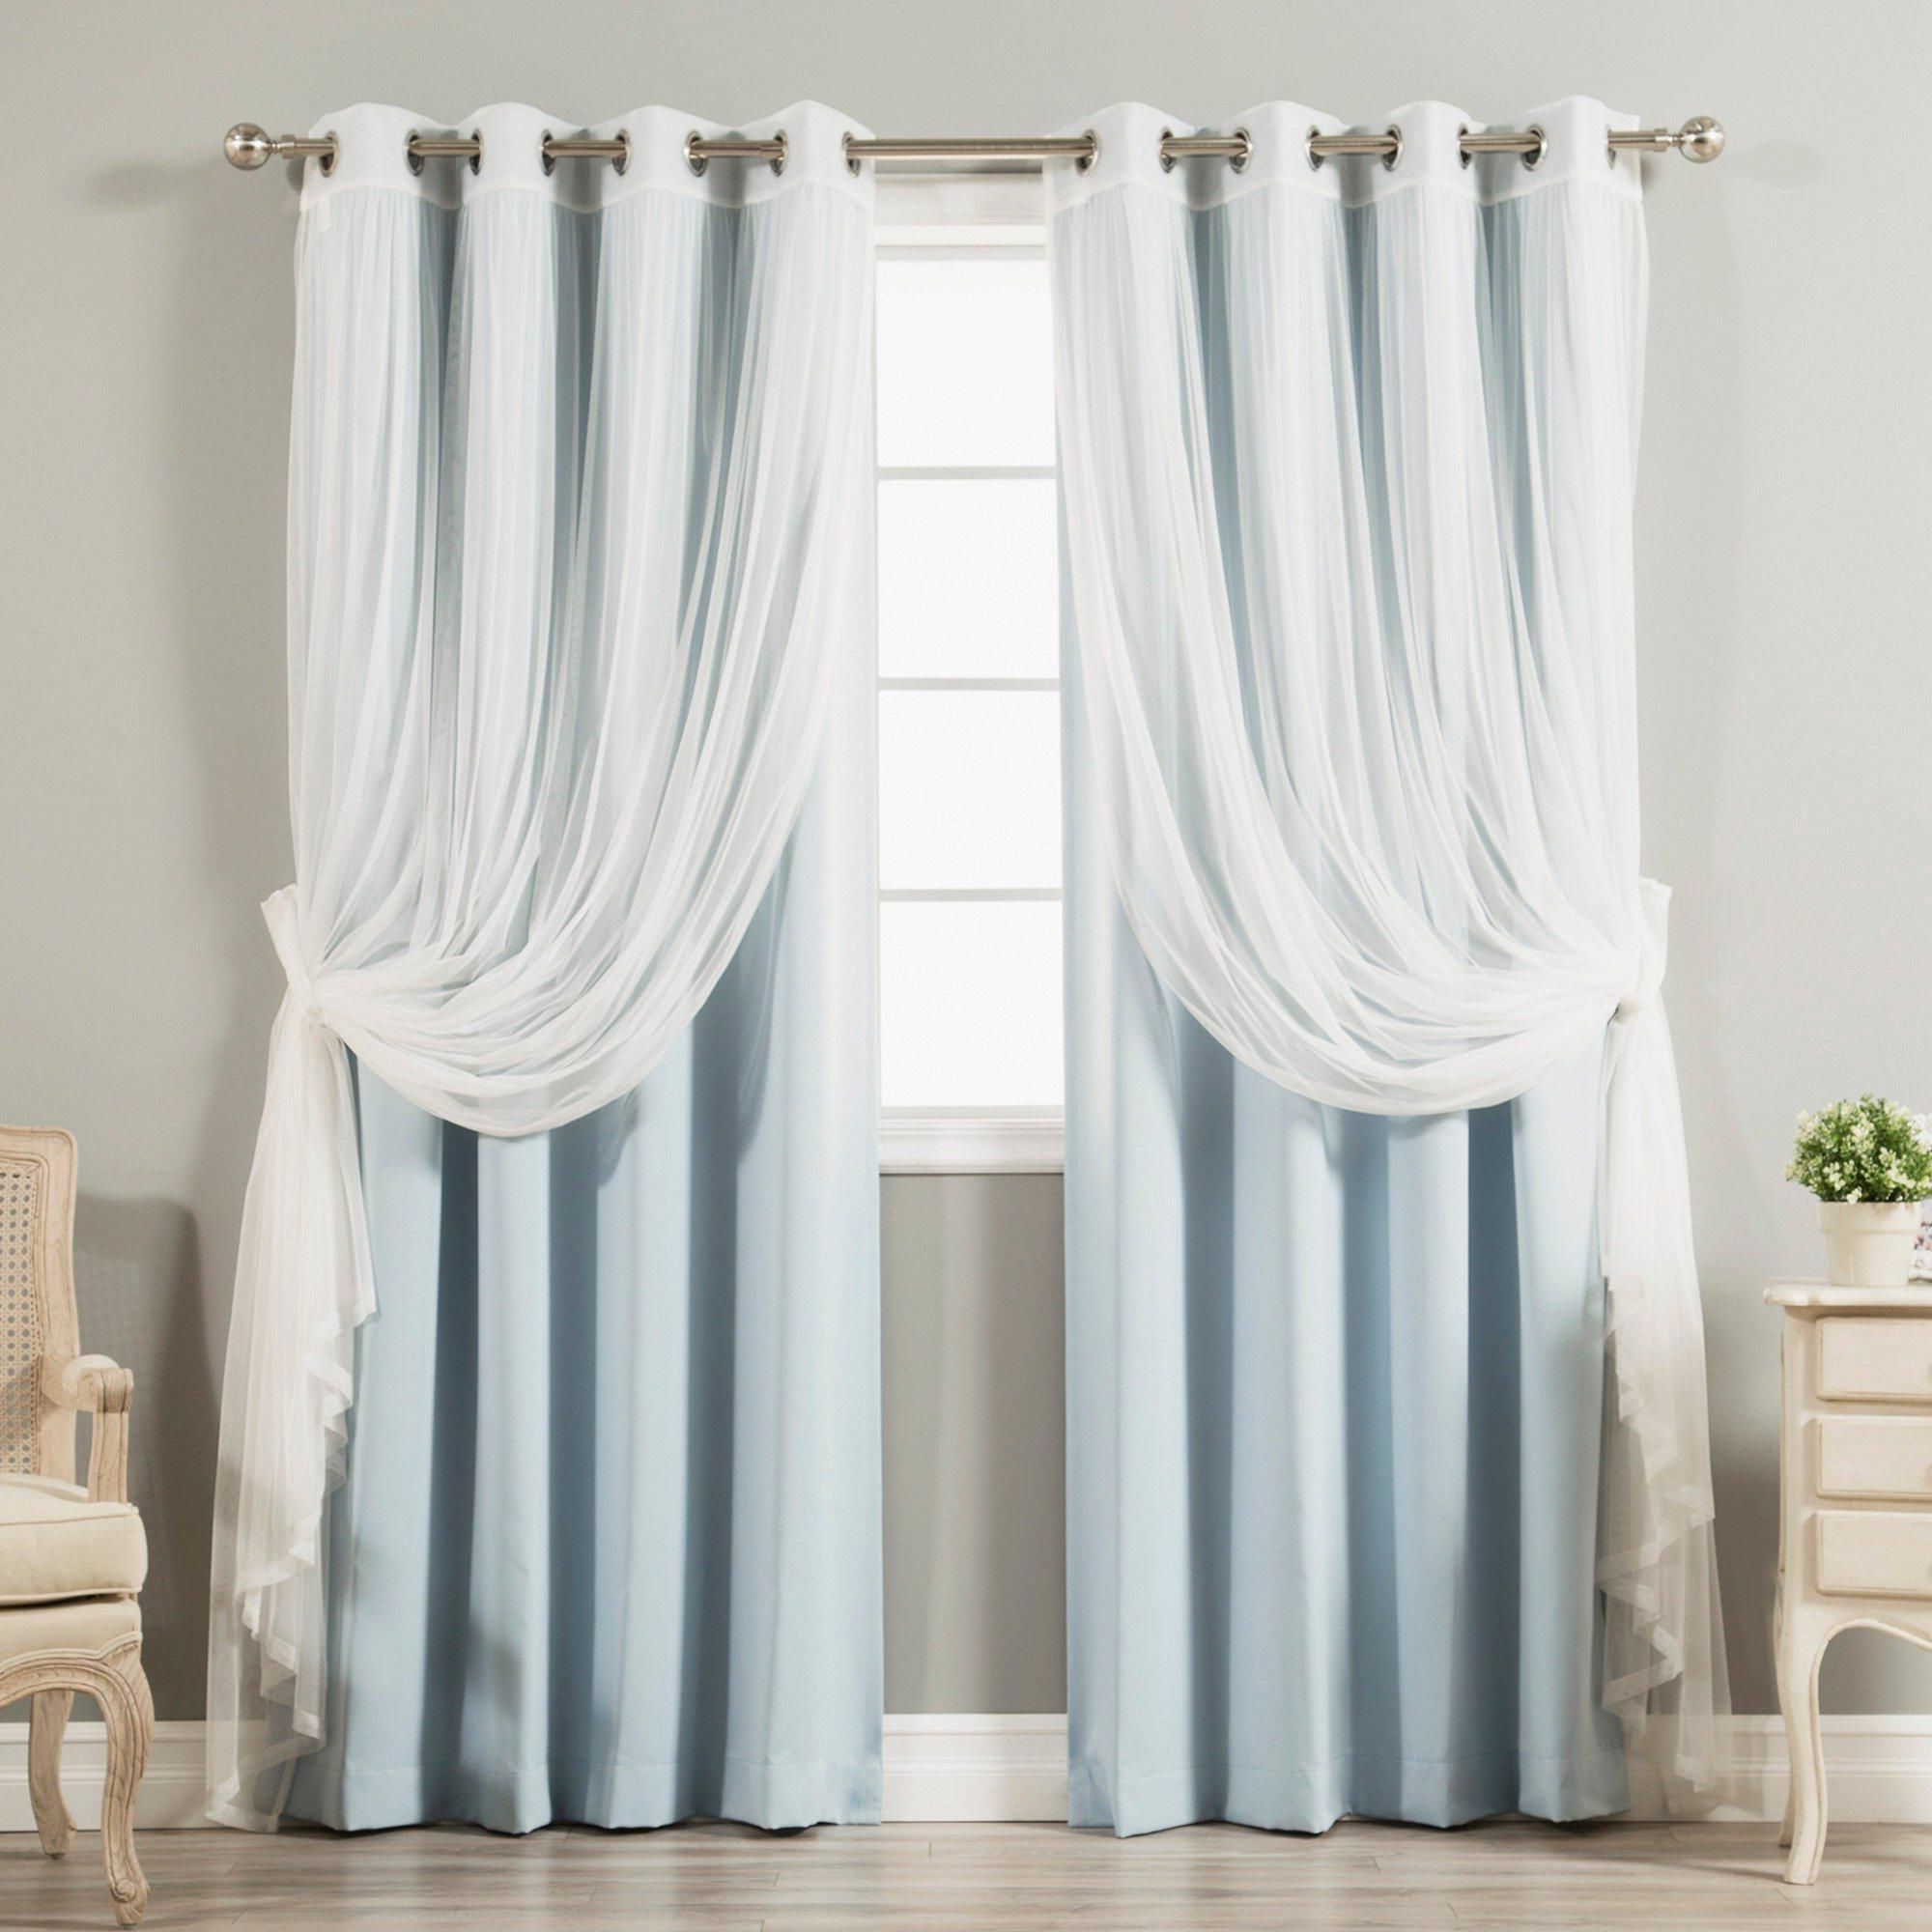 Famous Mix And Match Blackout Tulle Lace Sheer Curtain Panel Sets Intended For Aurora Home Mix And Match Blackout Tulle Lace Sheer 4 Piece (View 10 of 20)